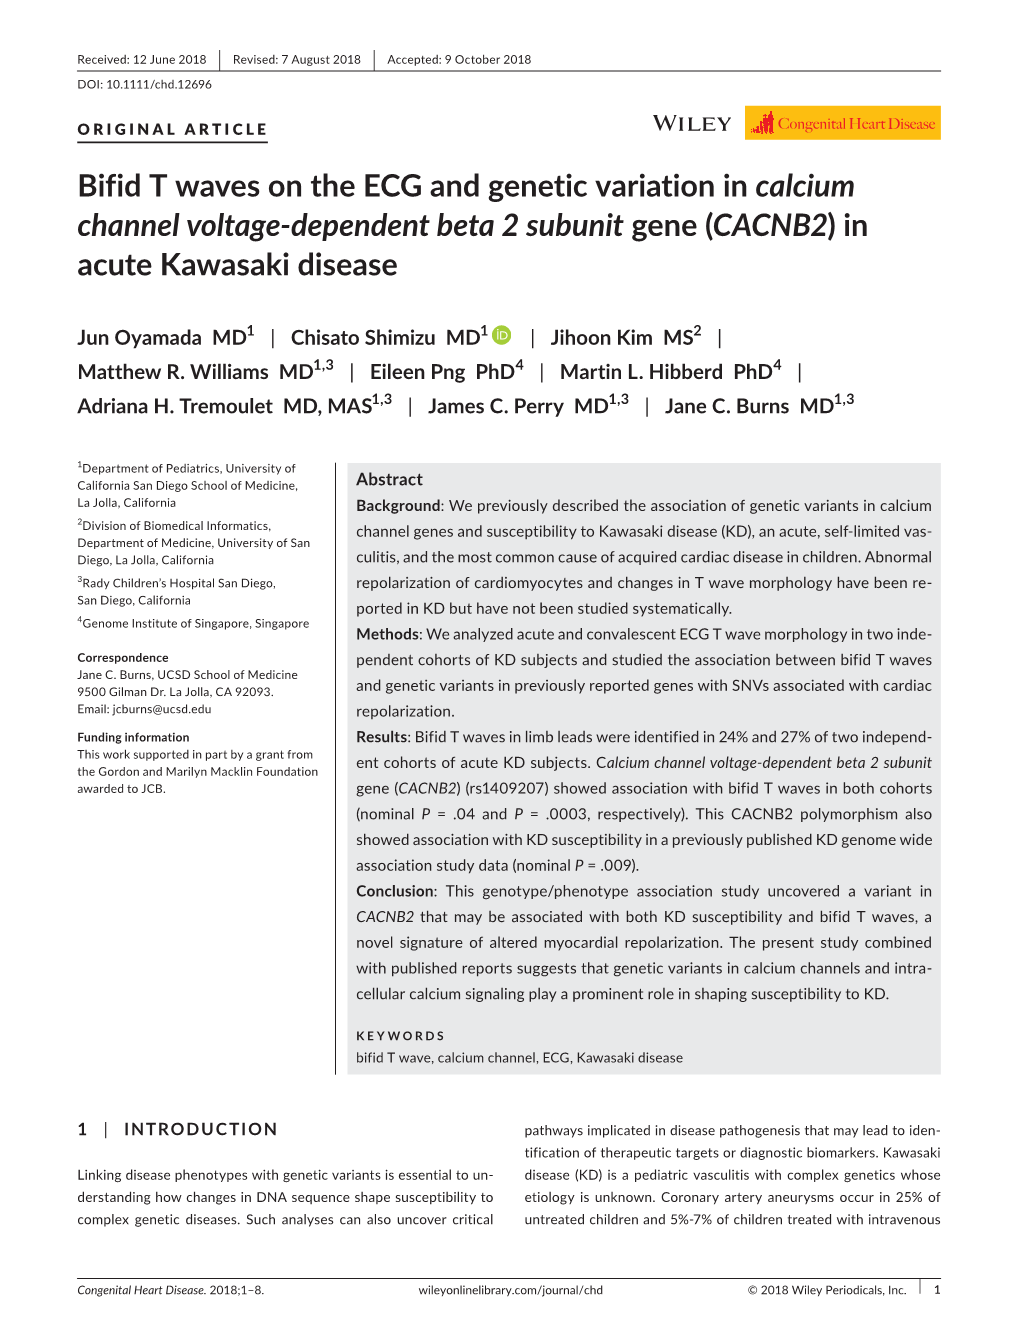 Bifid T Waves on the ECG and Genetic Variation in Calcium Channel Voltage‐Dependent Beta 2 Subunit Gene (CACNB2) in Acute Kawasaki Disease